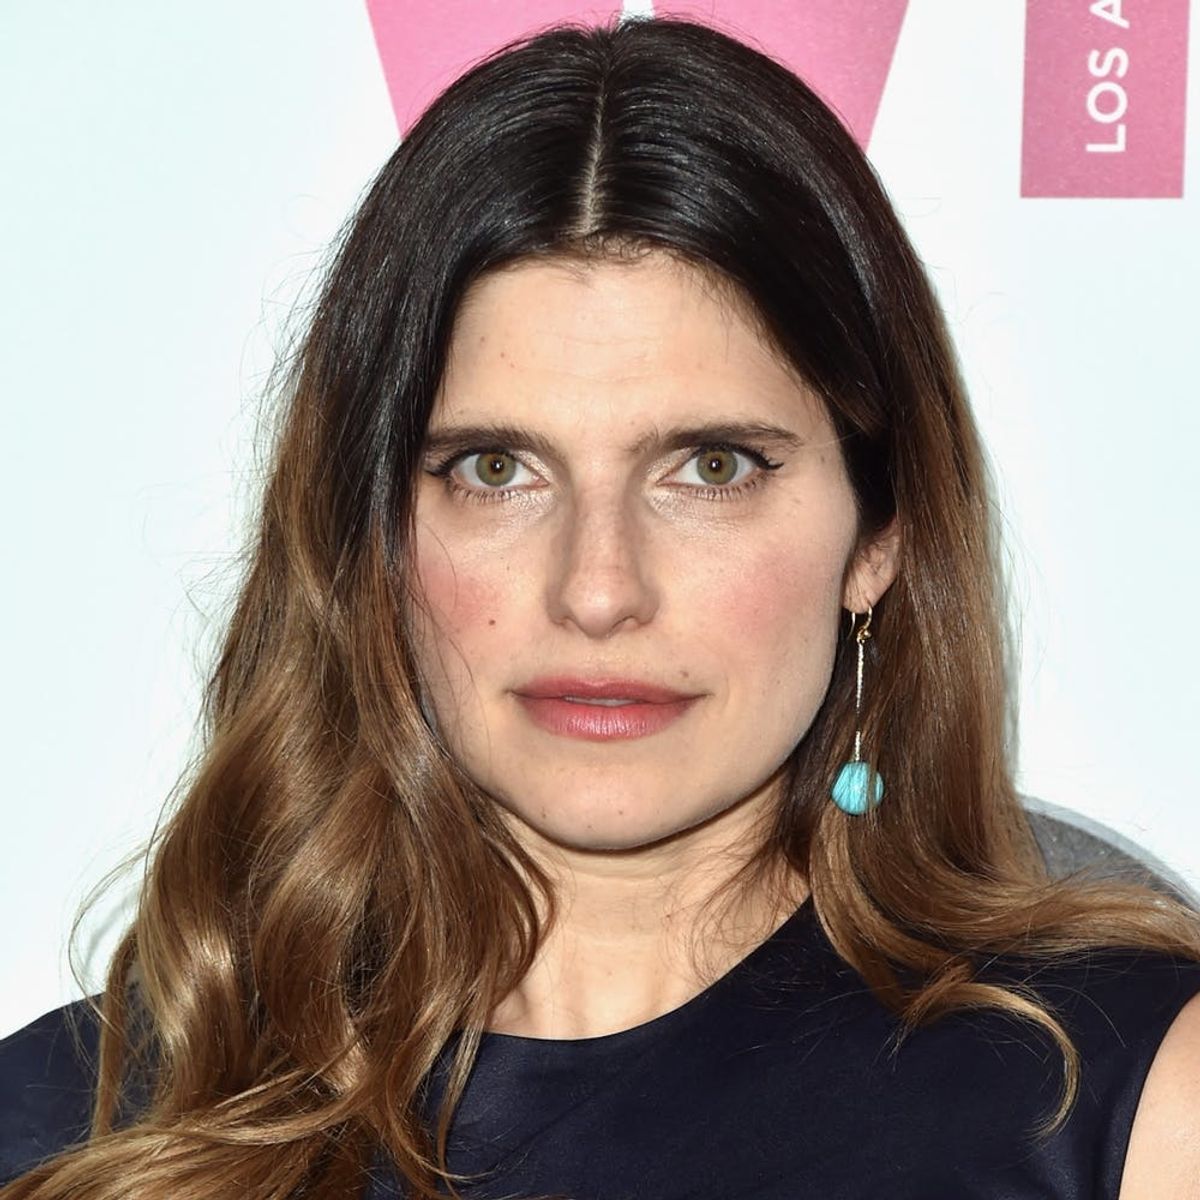 Lake Bell Swears She Didn’t Name Her Baby Boy After This Iconic Rocker